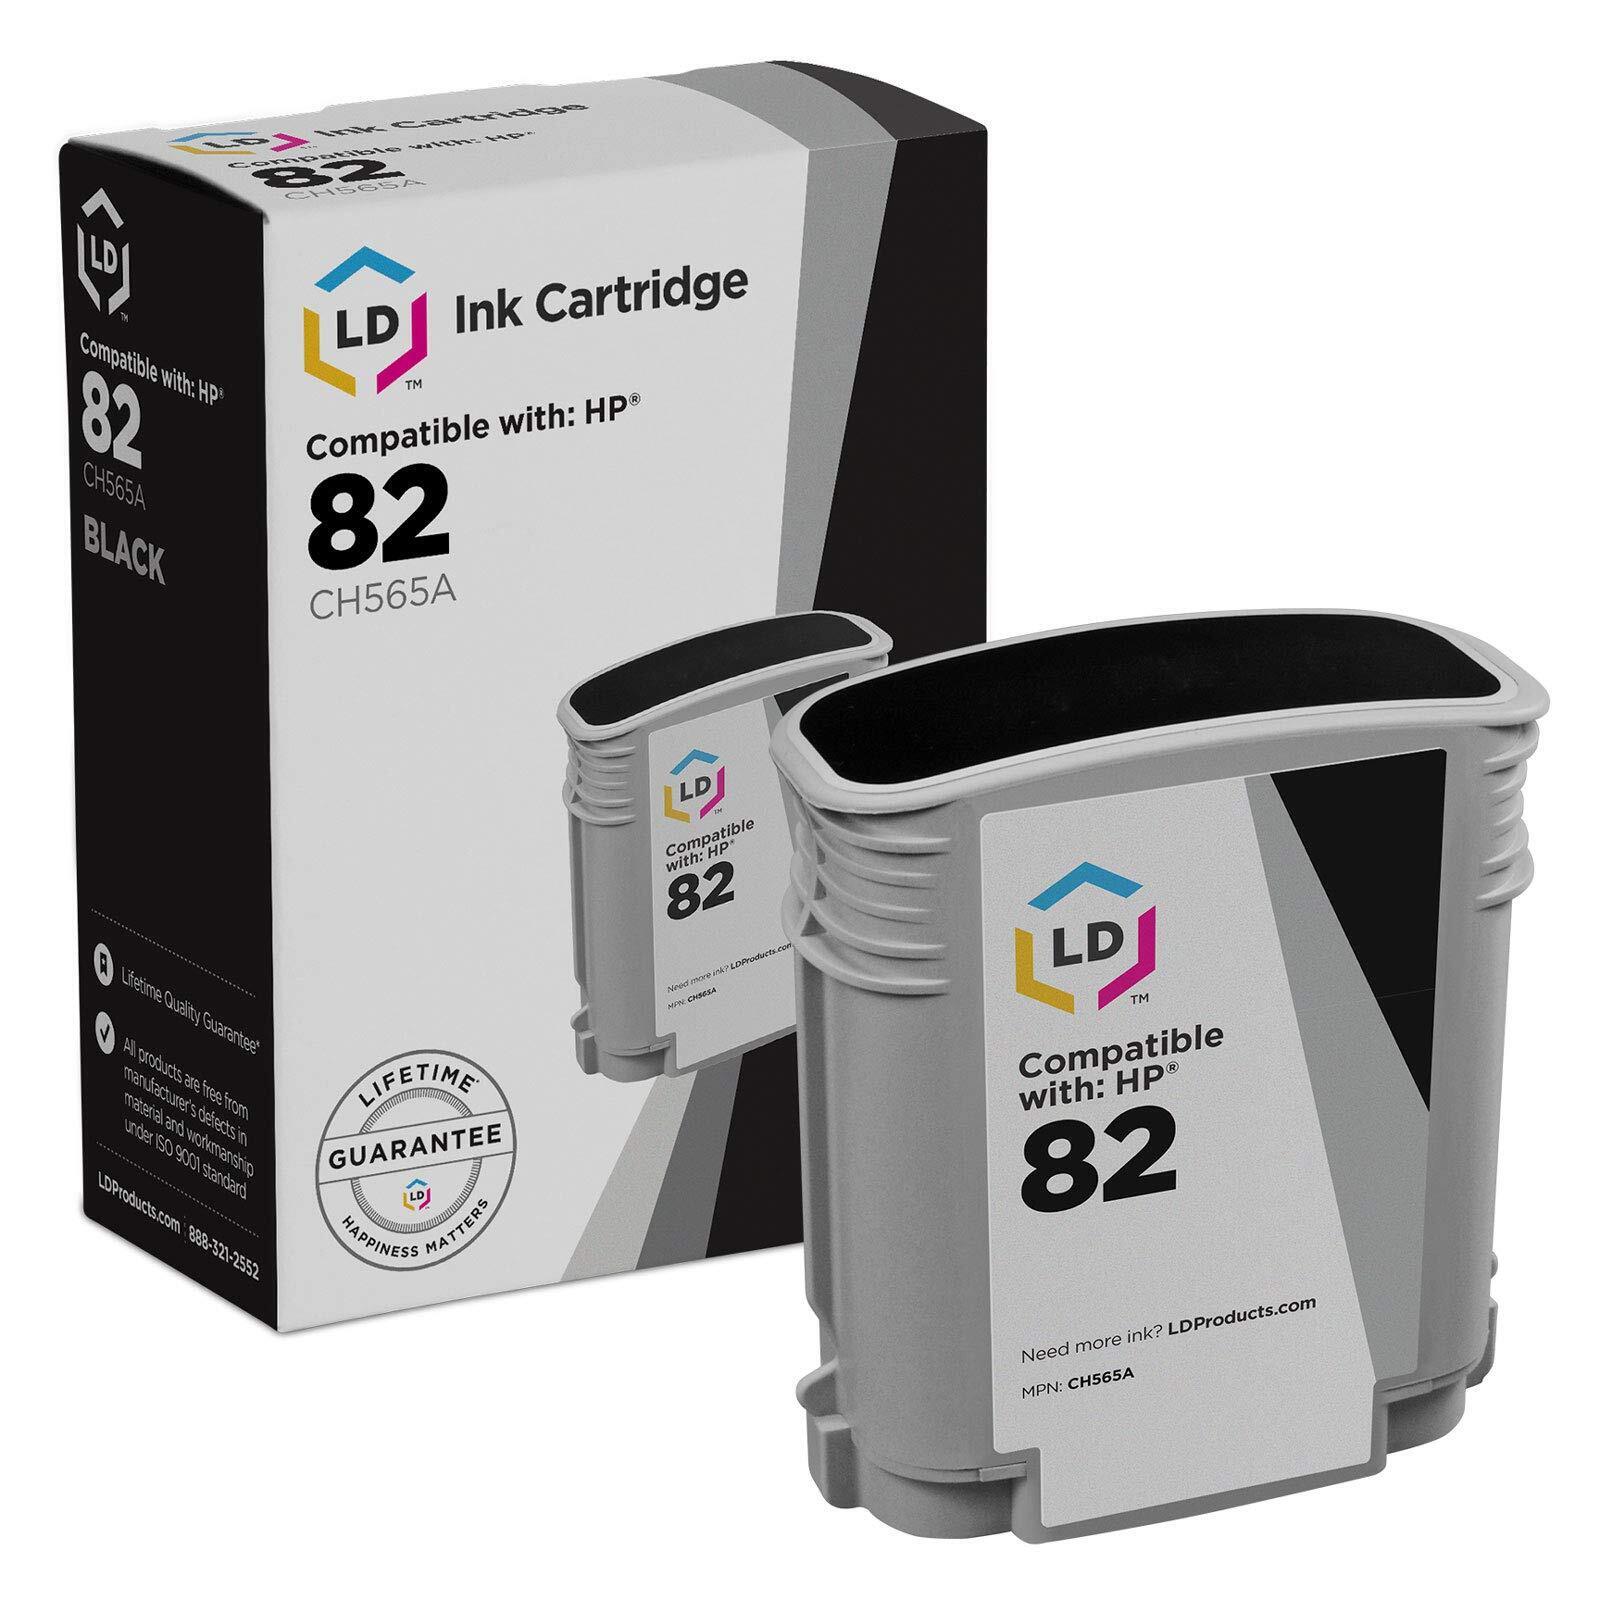 LD Reman CH565A Compatible with HP 82 Black Ink Cartridge for Designjet 111 510